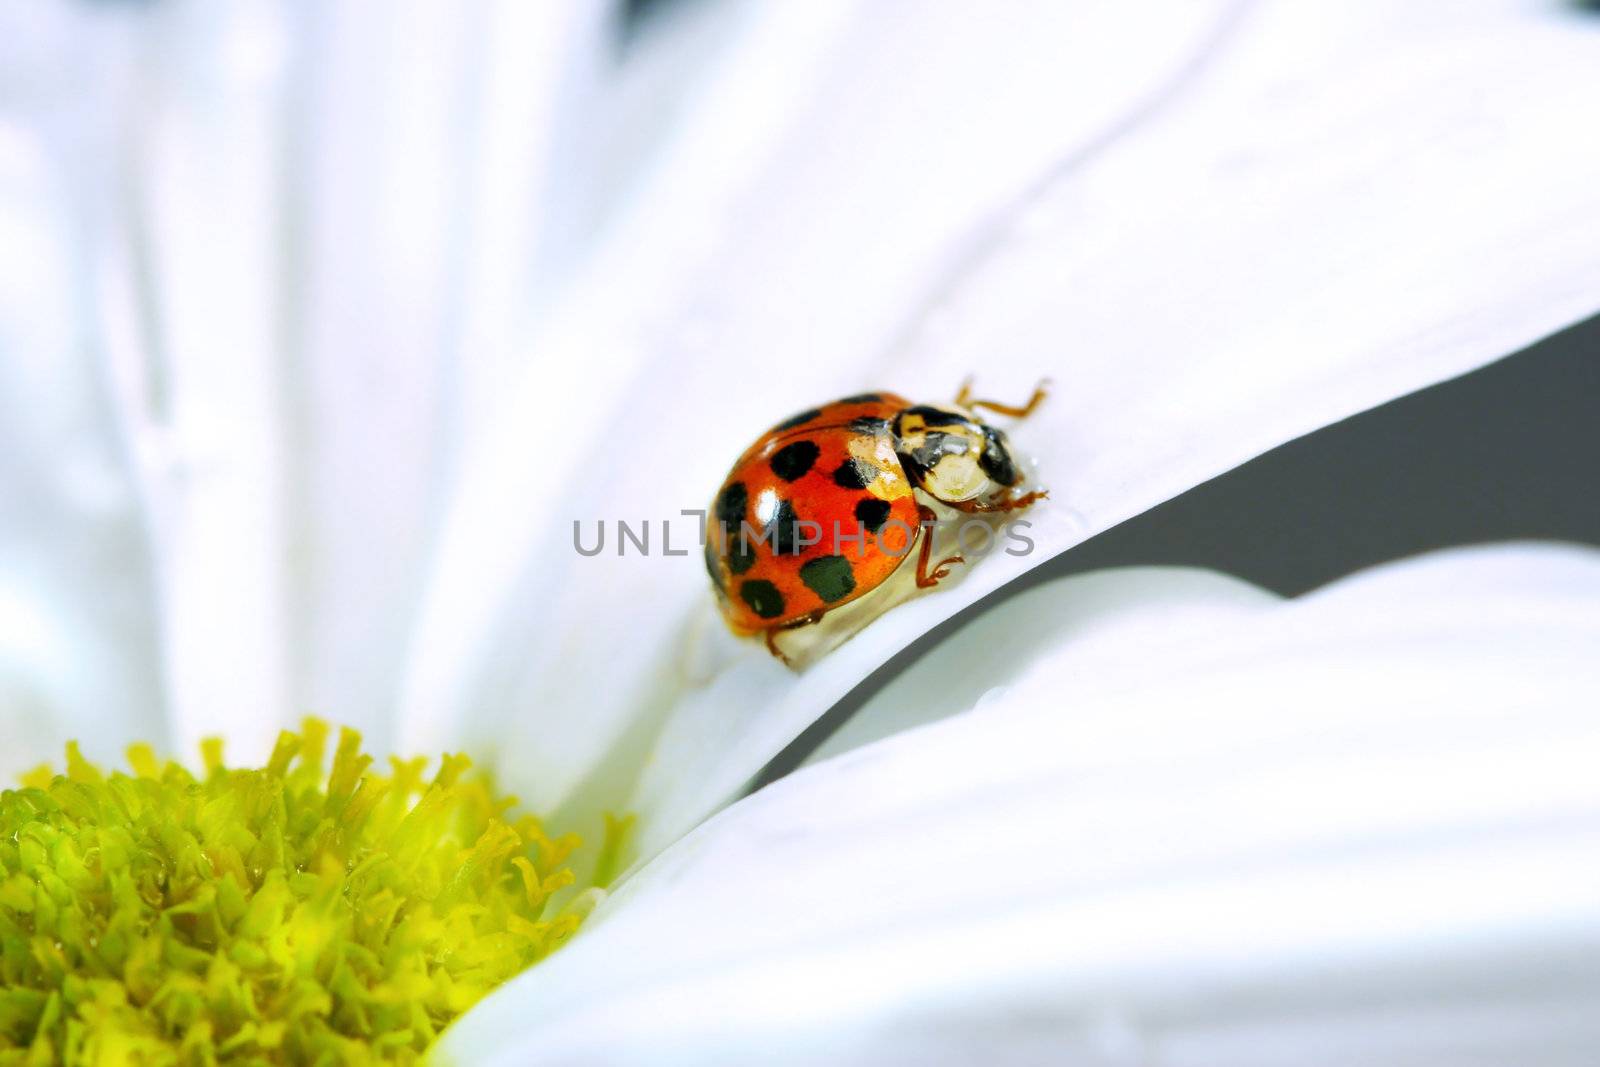 Little red ladybug on the petal of a daisy  